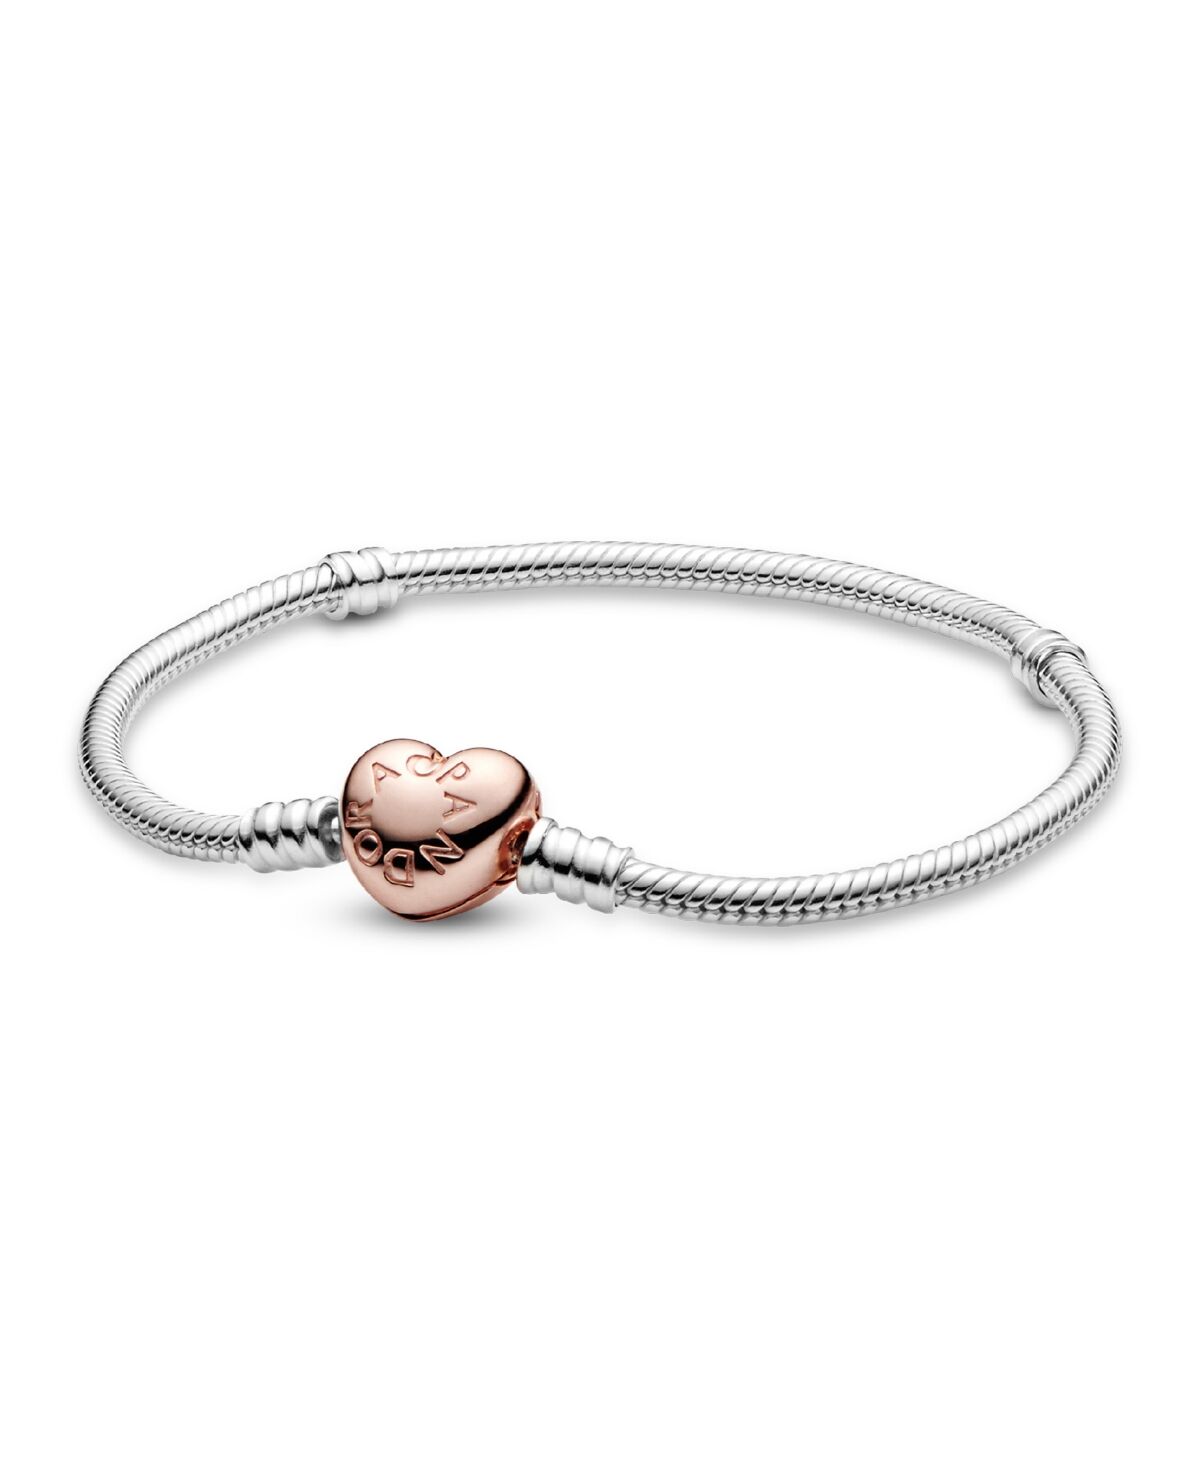 Pandora Moments Sterling Silver and 14K Rose Gold-Plated Heart Clasp Snake Chain Bracelet - Silver